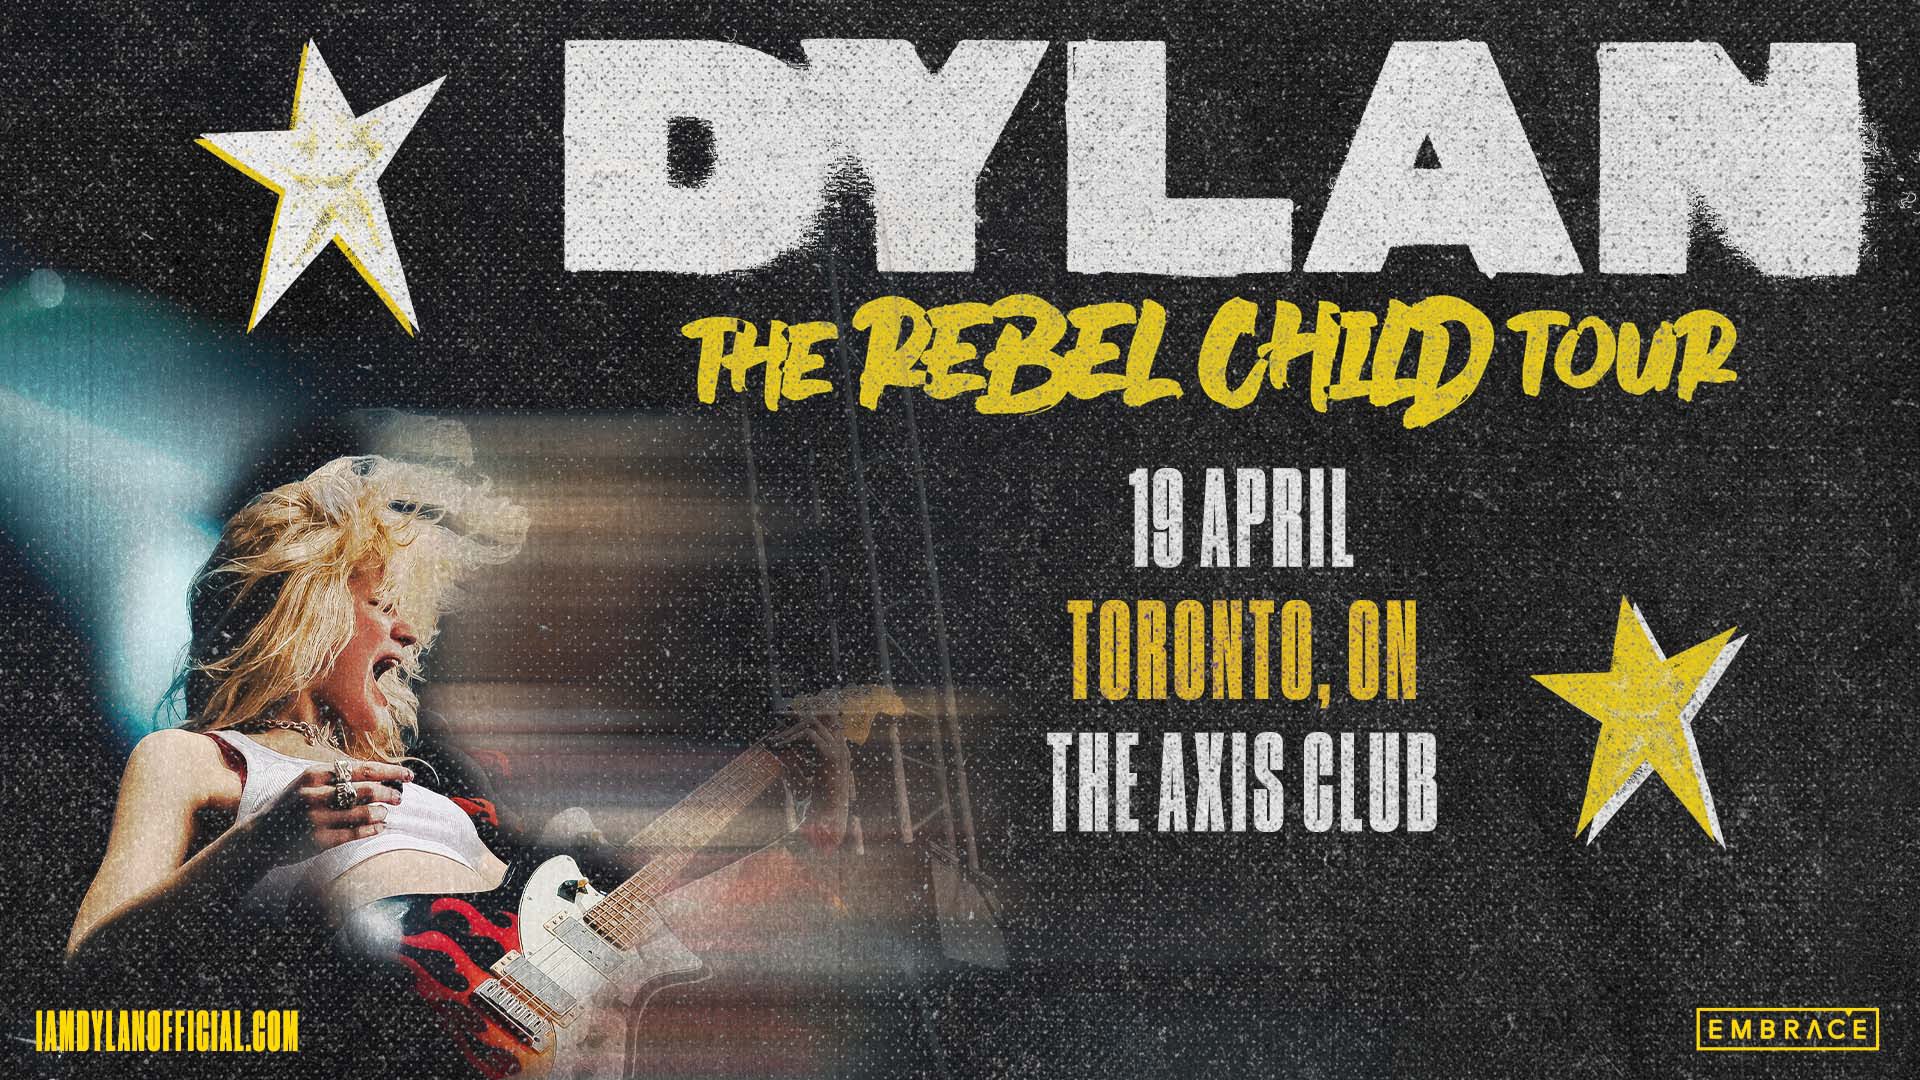 Get Tickets To See DYLAN at Toronto Axis Club April 19